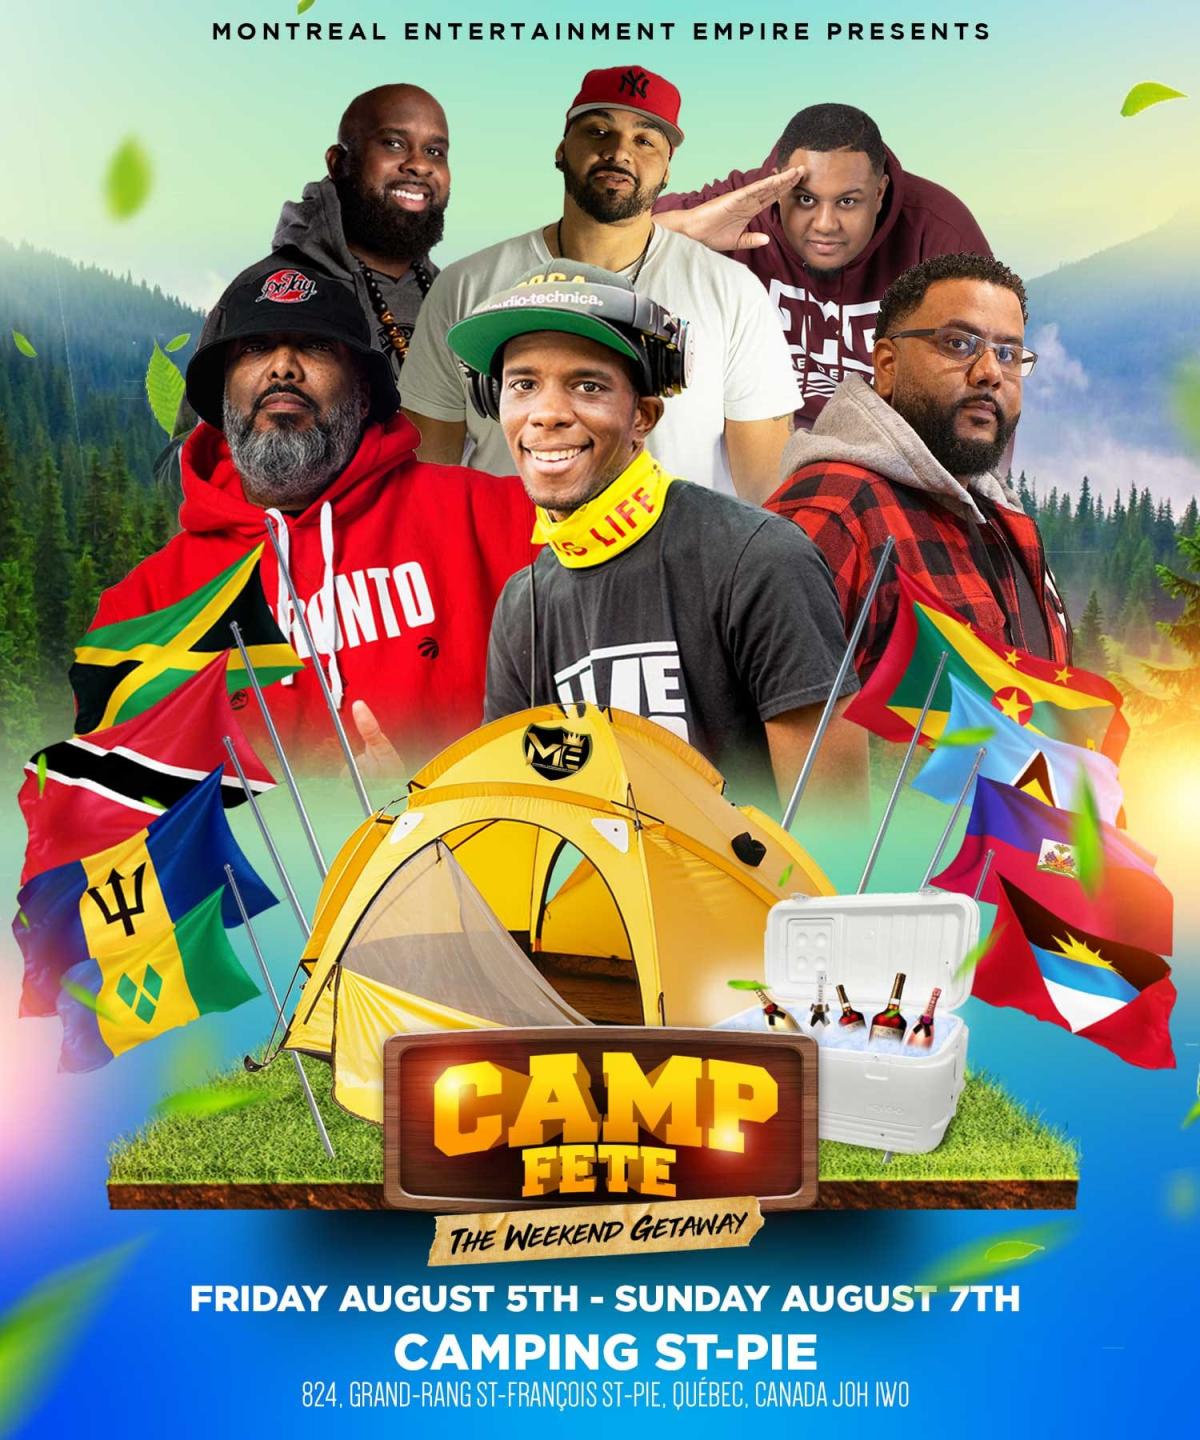 Camp Fete flyer or graphic.